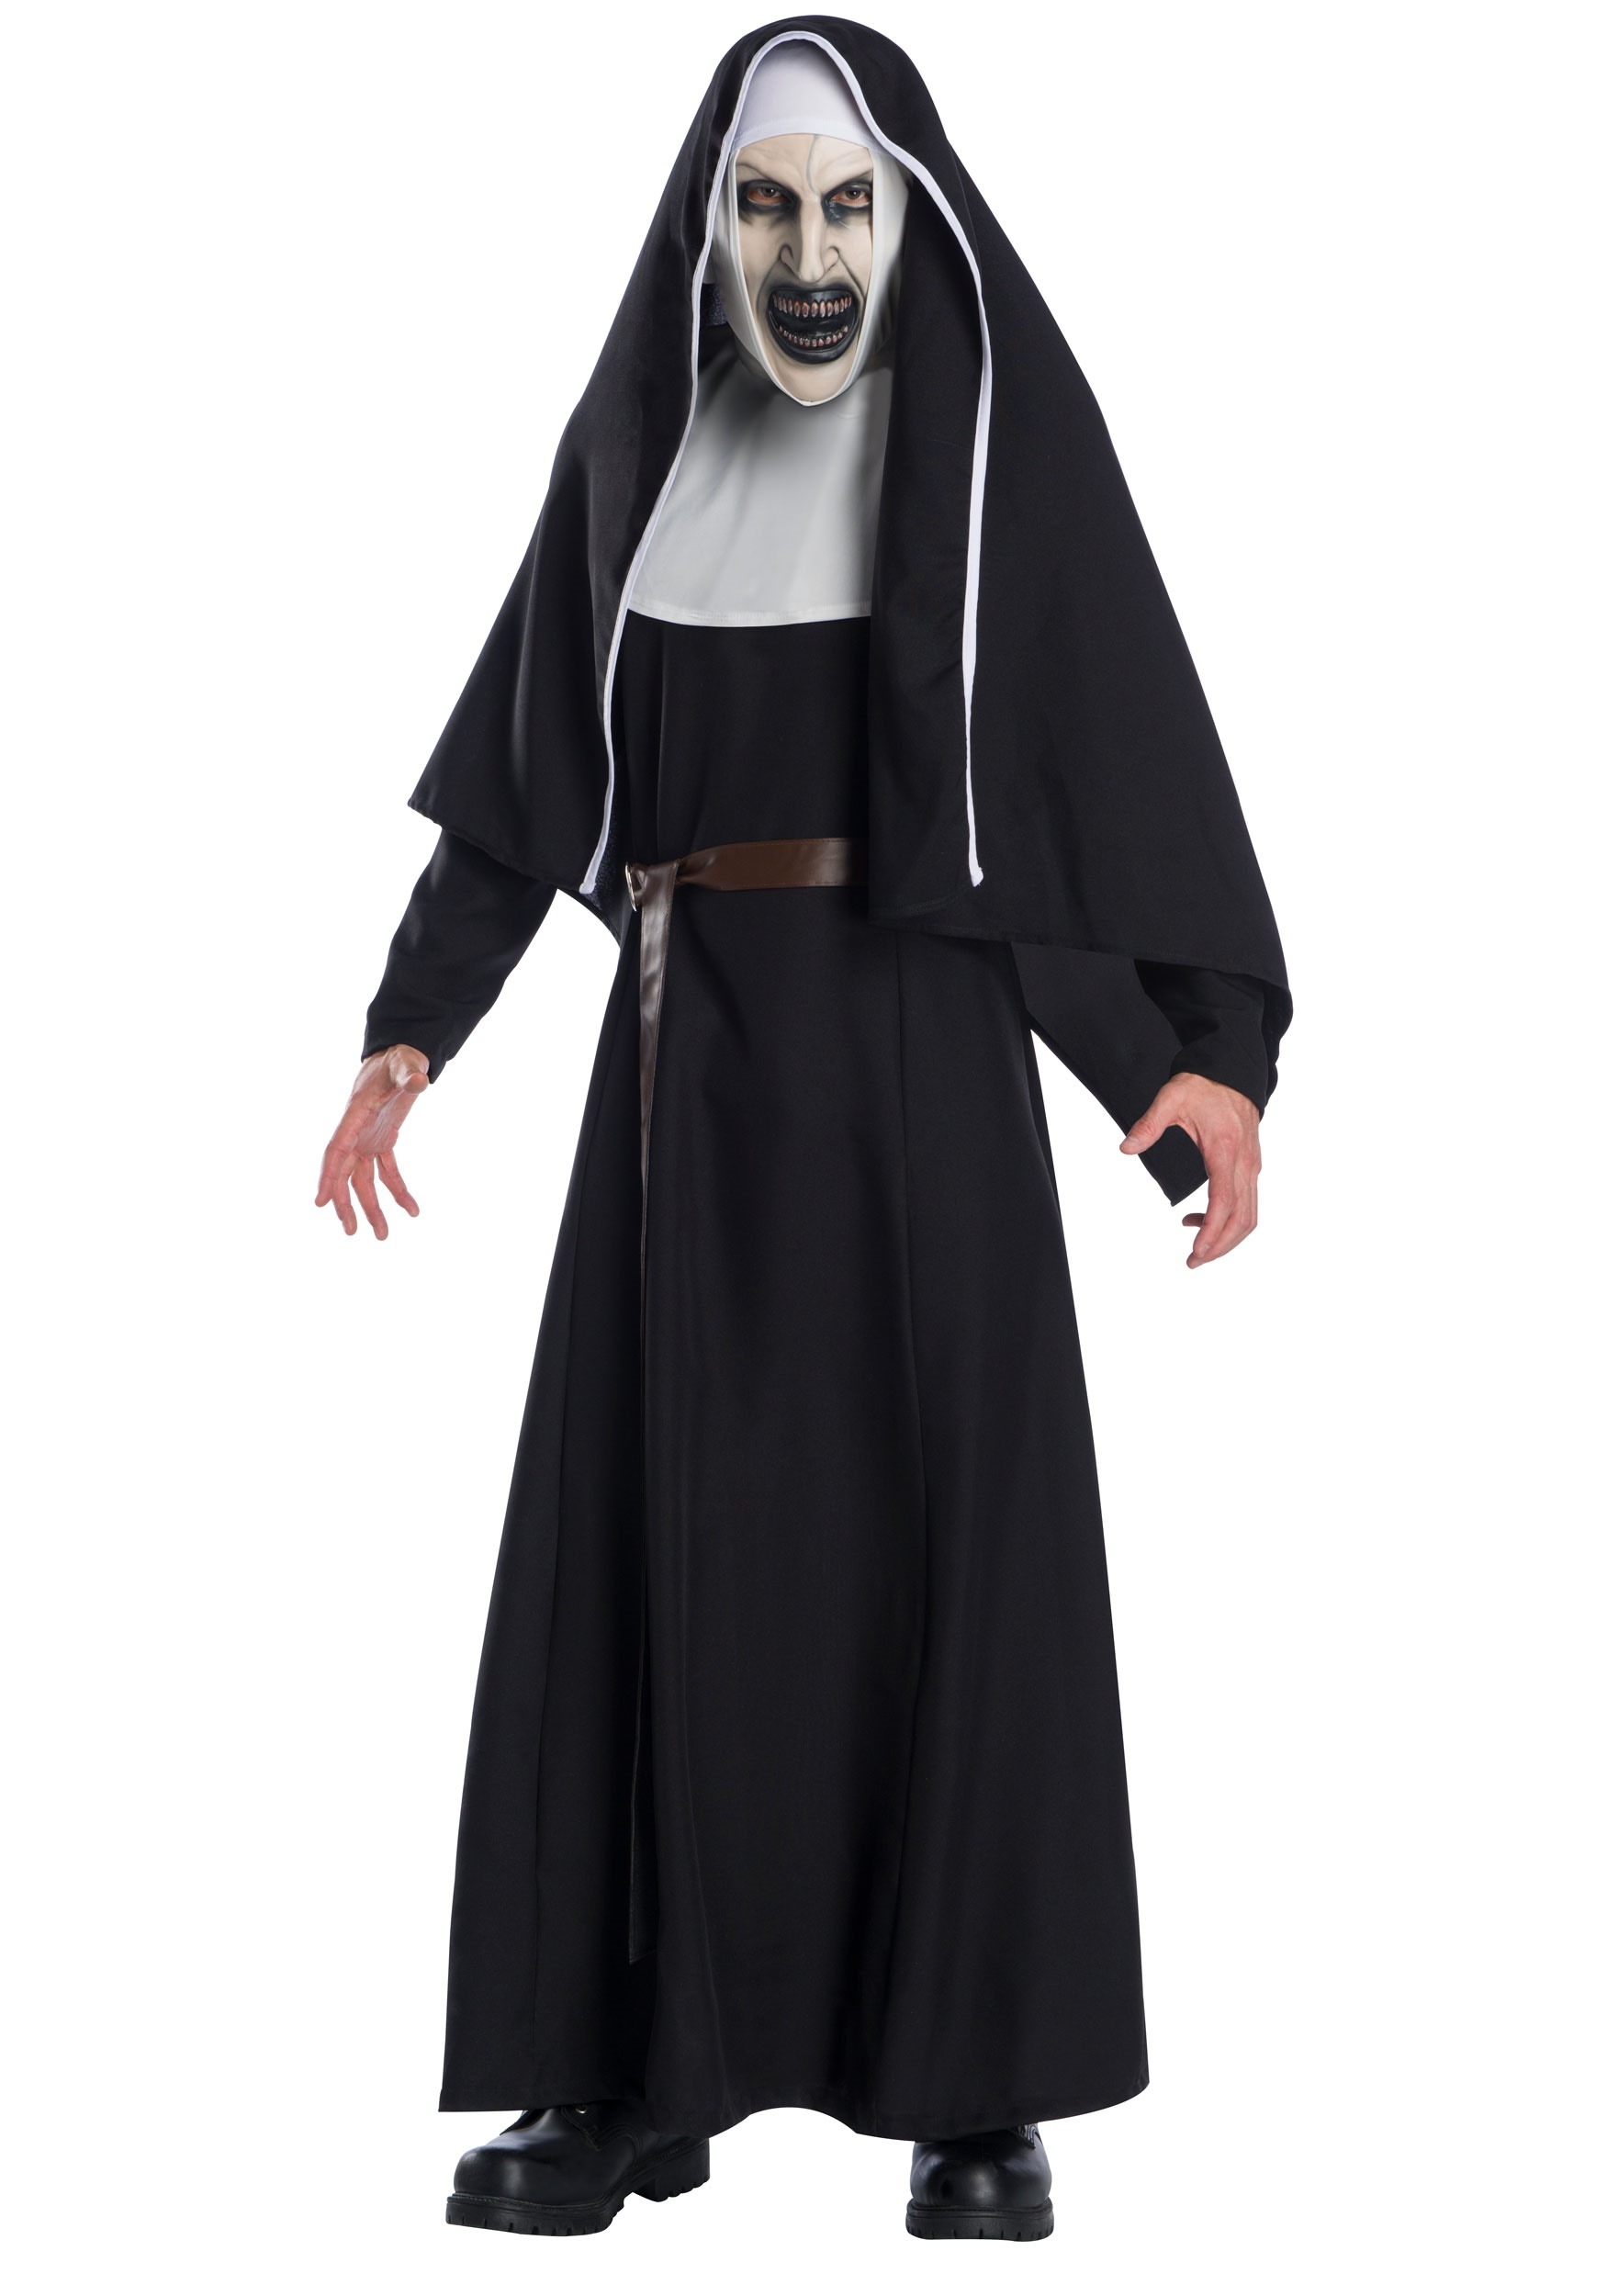 Image of The Nun Deluxe Adult Costume ID RU821203-ST